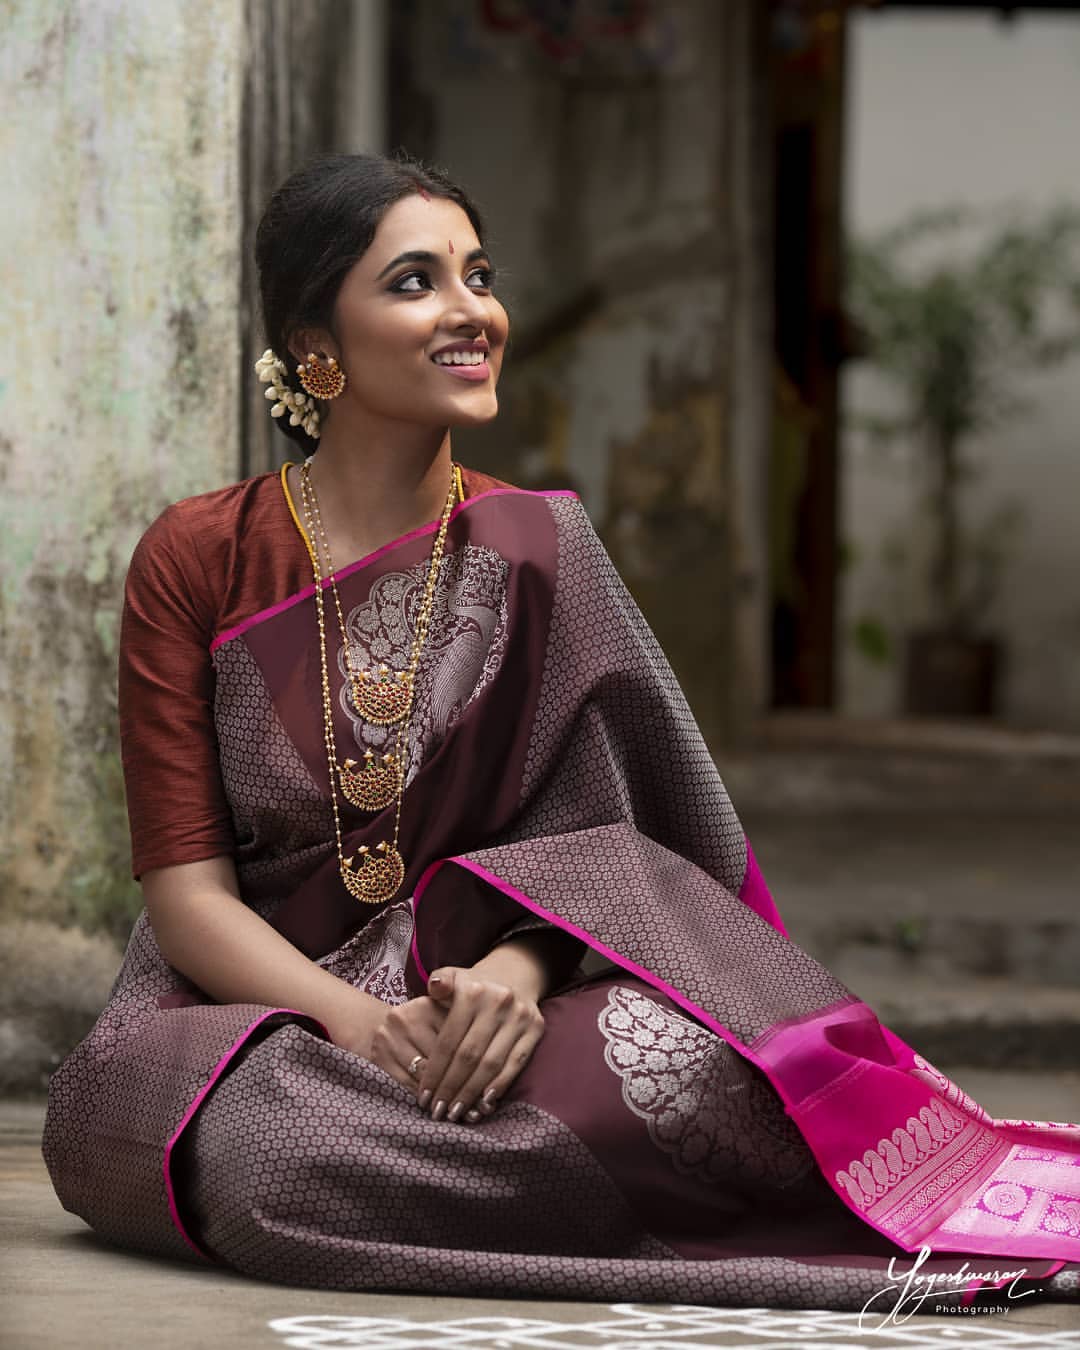 Priyanka Mohan Look Beautiful In Purple Pink Saree Outfit Priyanka Arul Mohan Traditional Outfit Looks Collection